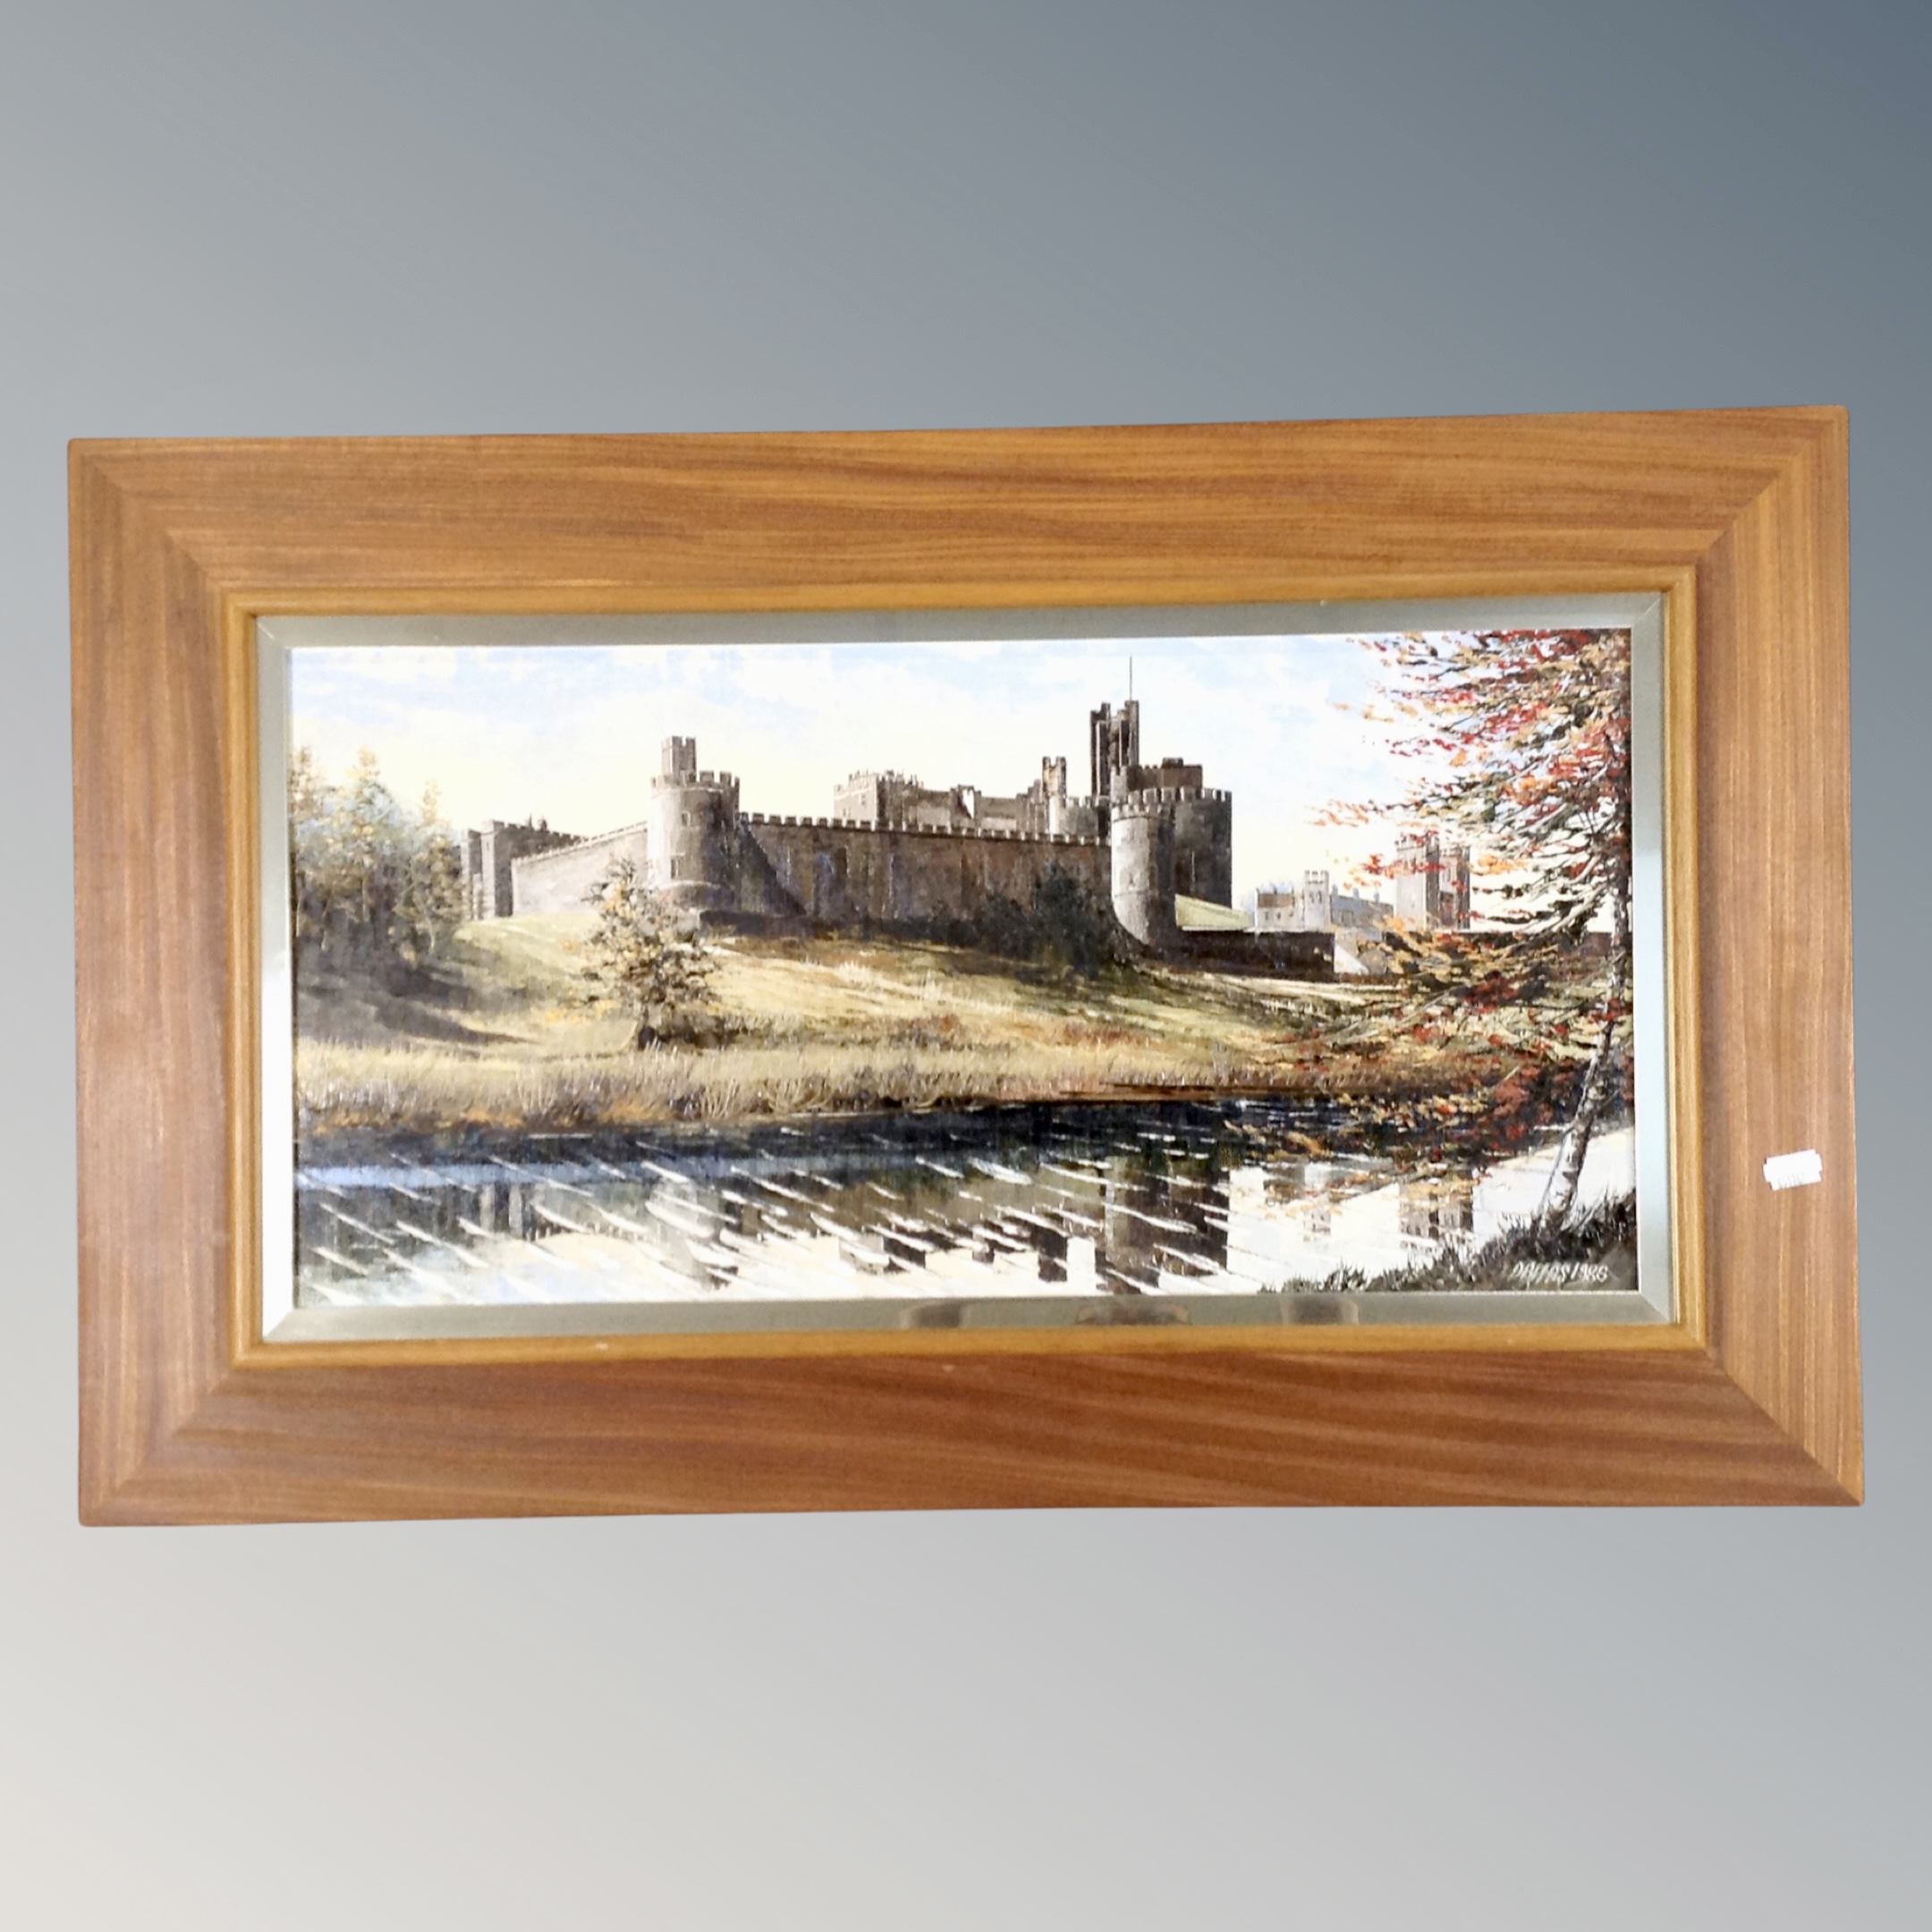 Dallas K Taylor : Alnwick castle, oil on board, signed and dated 1986, 59 cm x 29 cm.